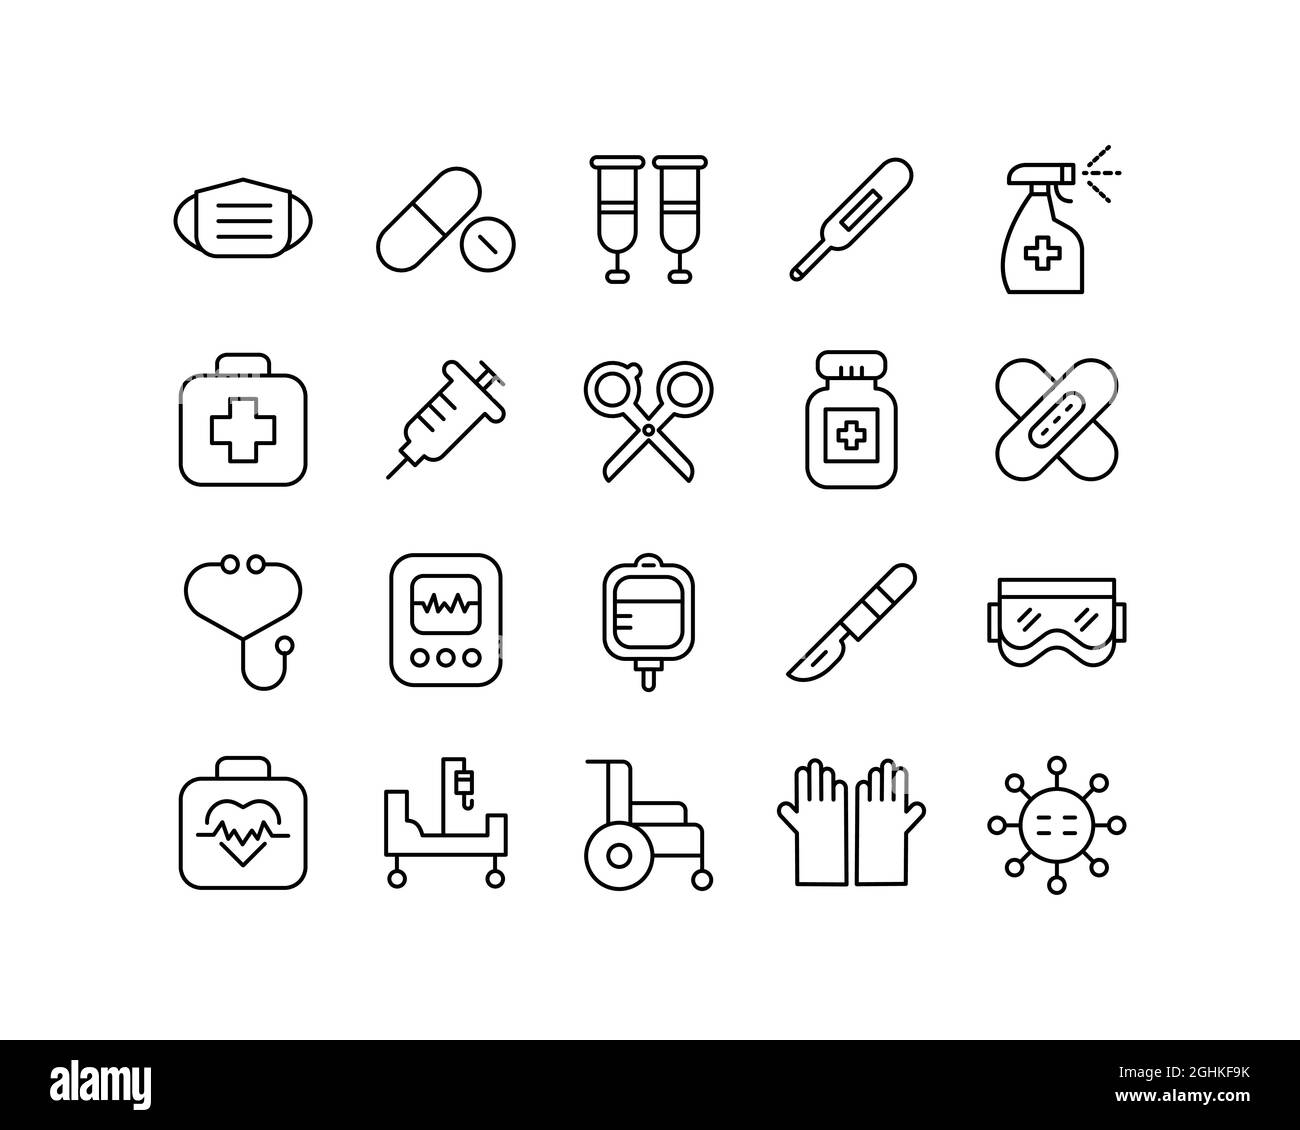 Medical icon set with black outline. Collection of icons for Covid-19, pandemic, and general biomedical uses Stock Vector